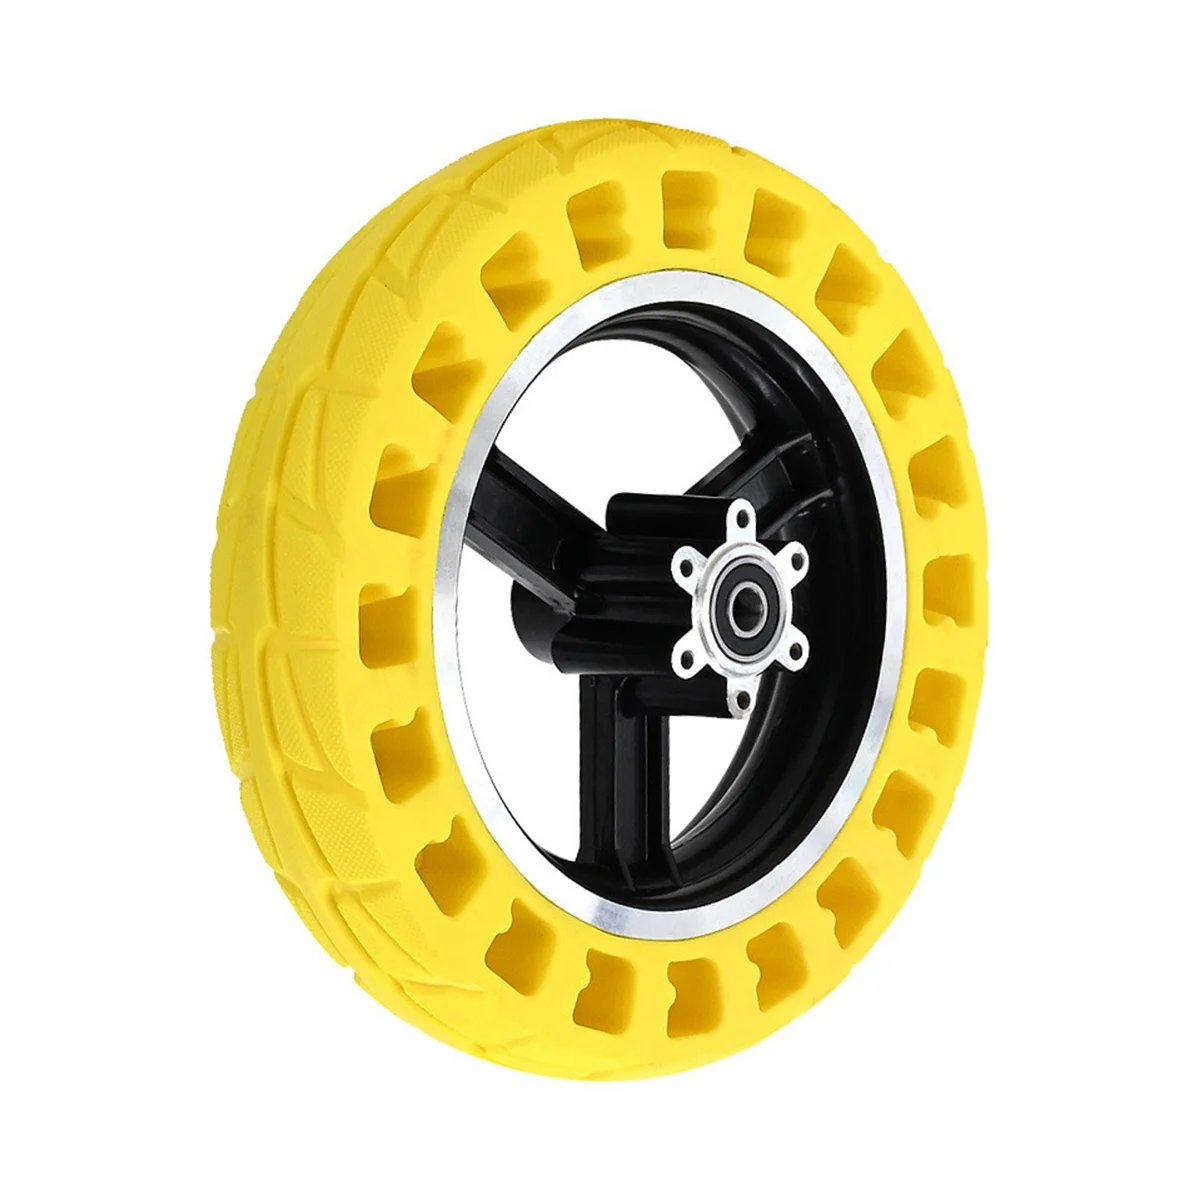 

10 x 2.125 Inch Tires Electric Scooter Honeycomb Solid Shock Absorbing Tire Hub for